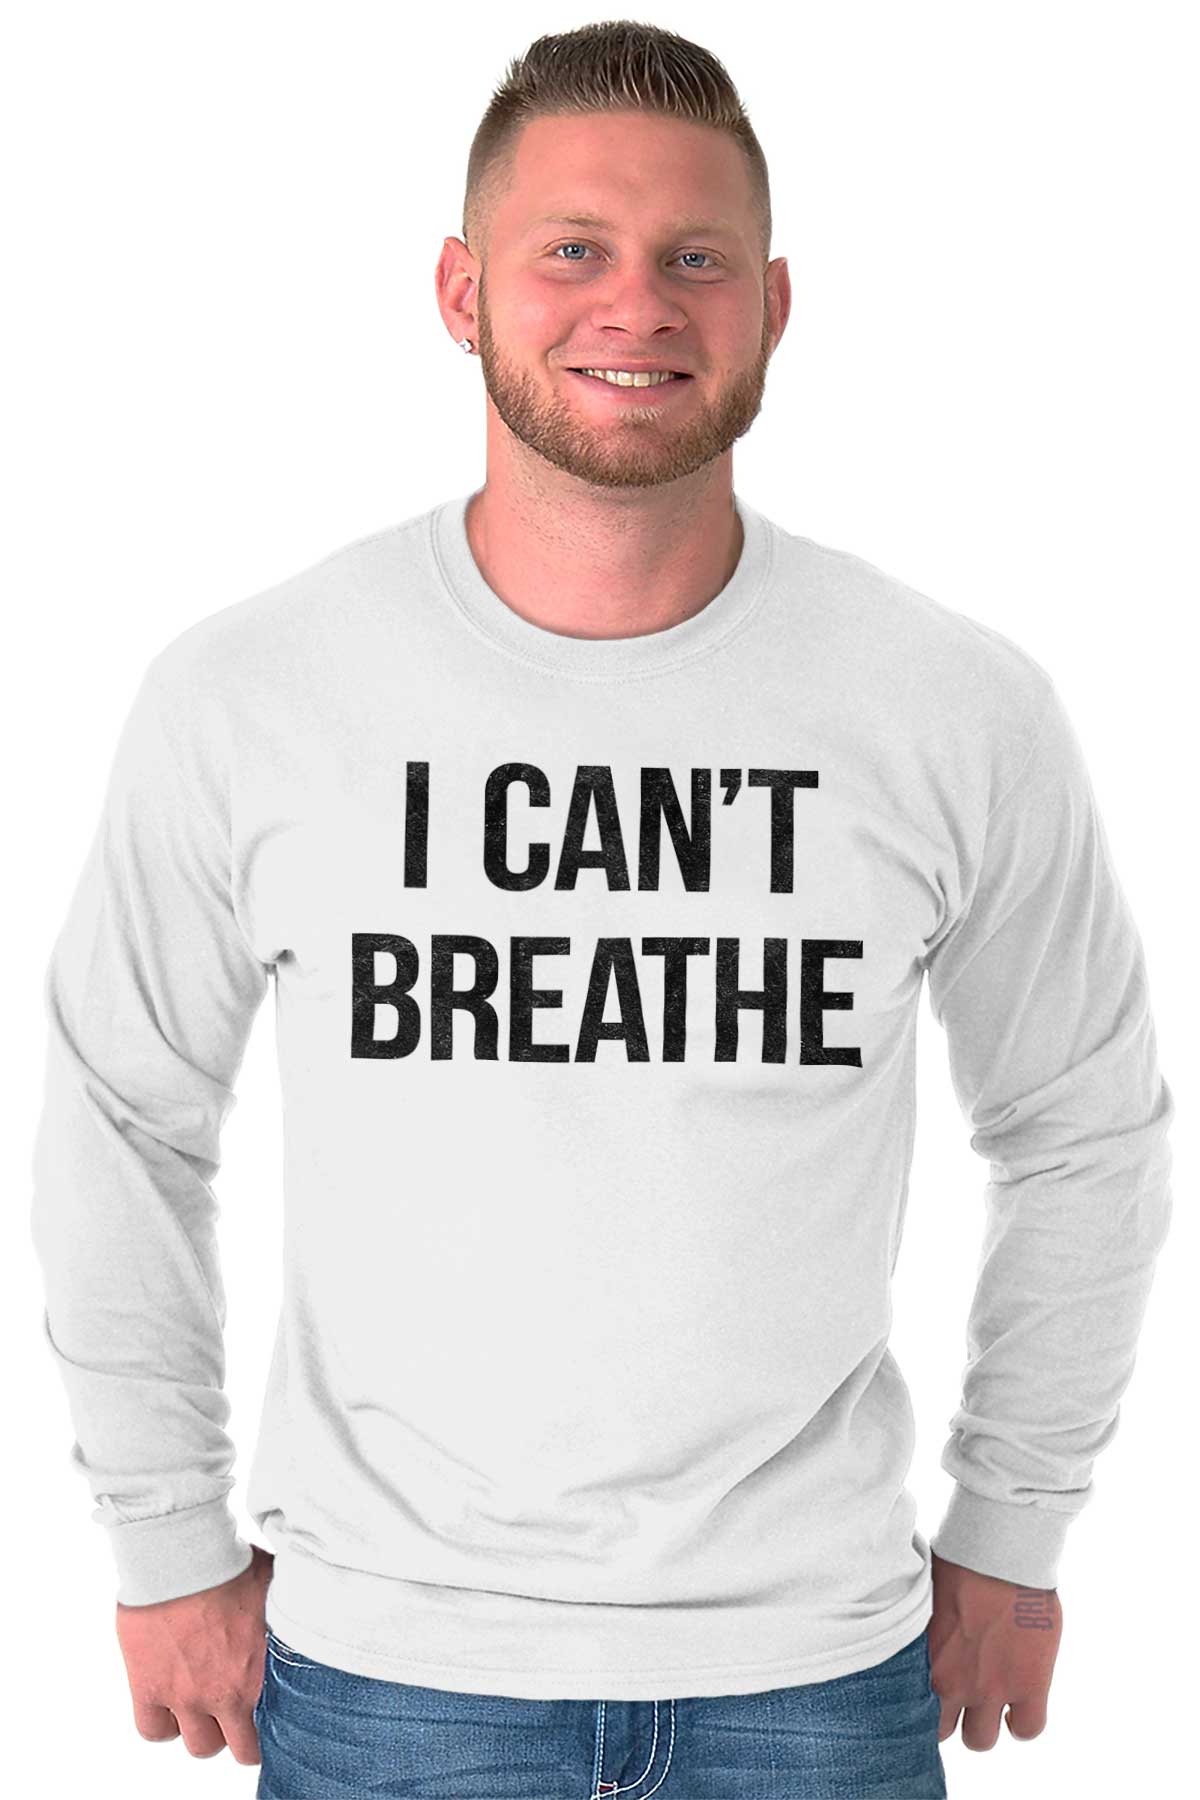 Cant Breathe Black Lives Matter Blm Protest Long Sleeve Tshirt Tee For